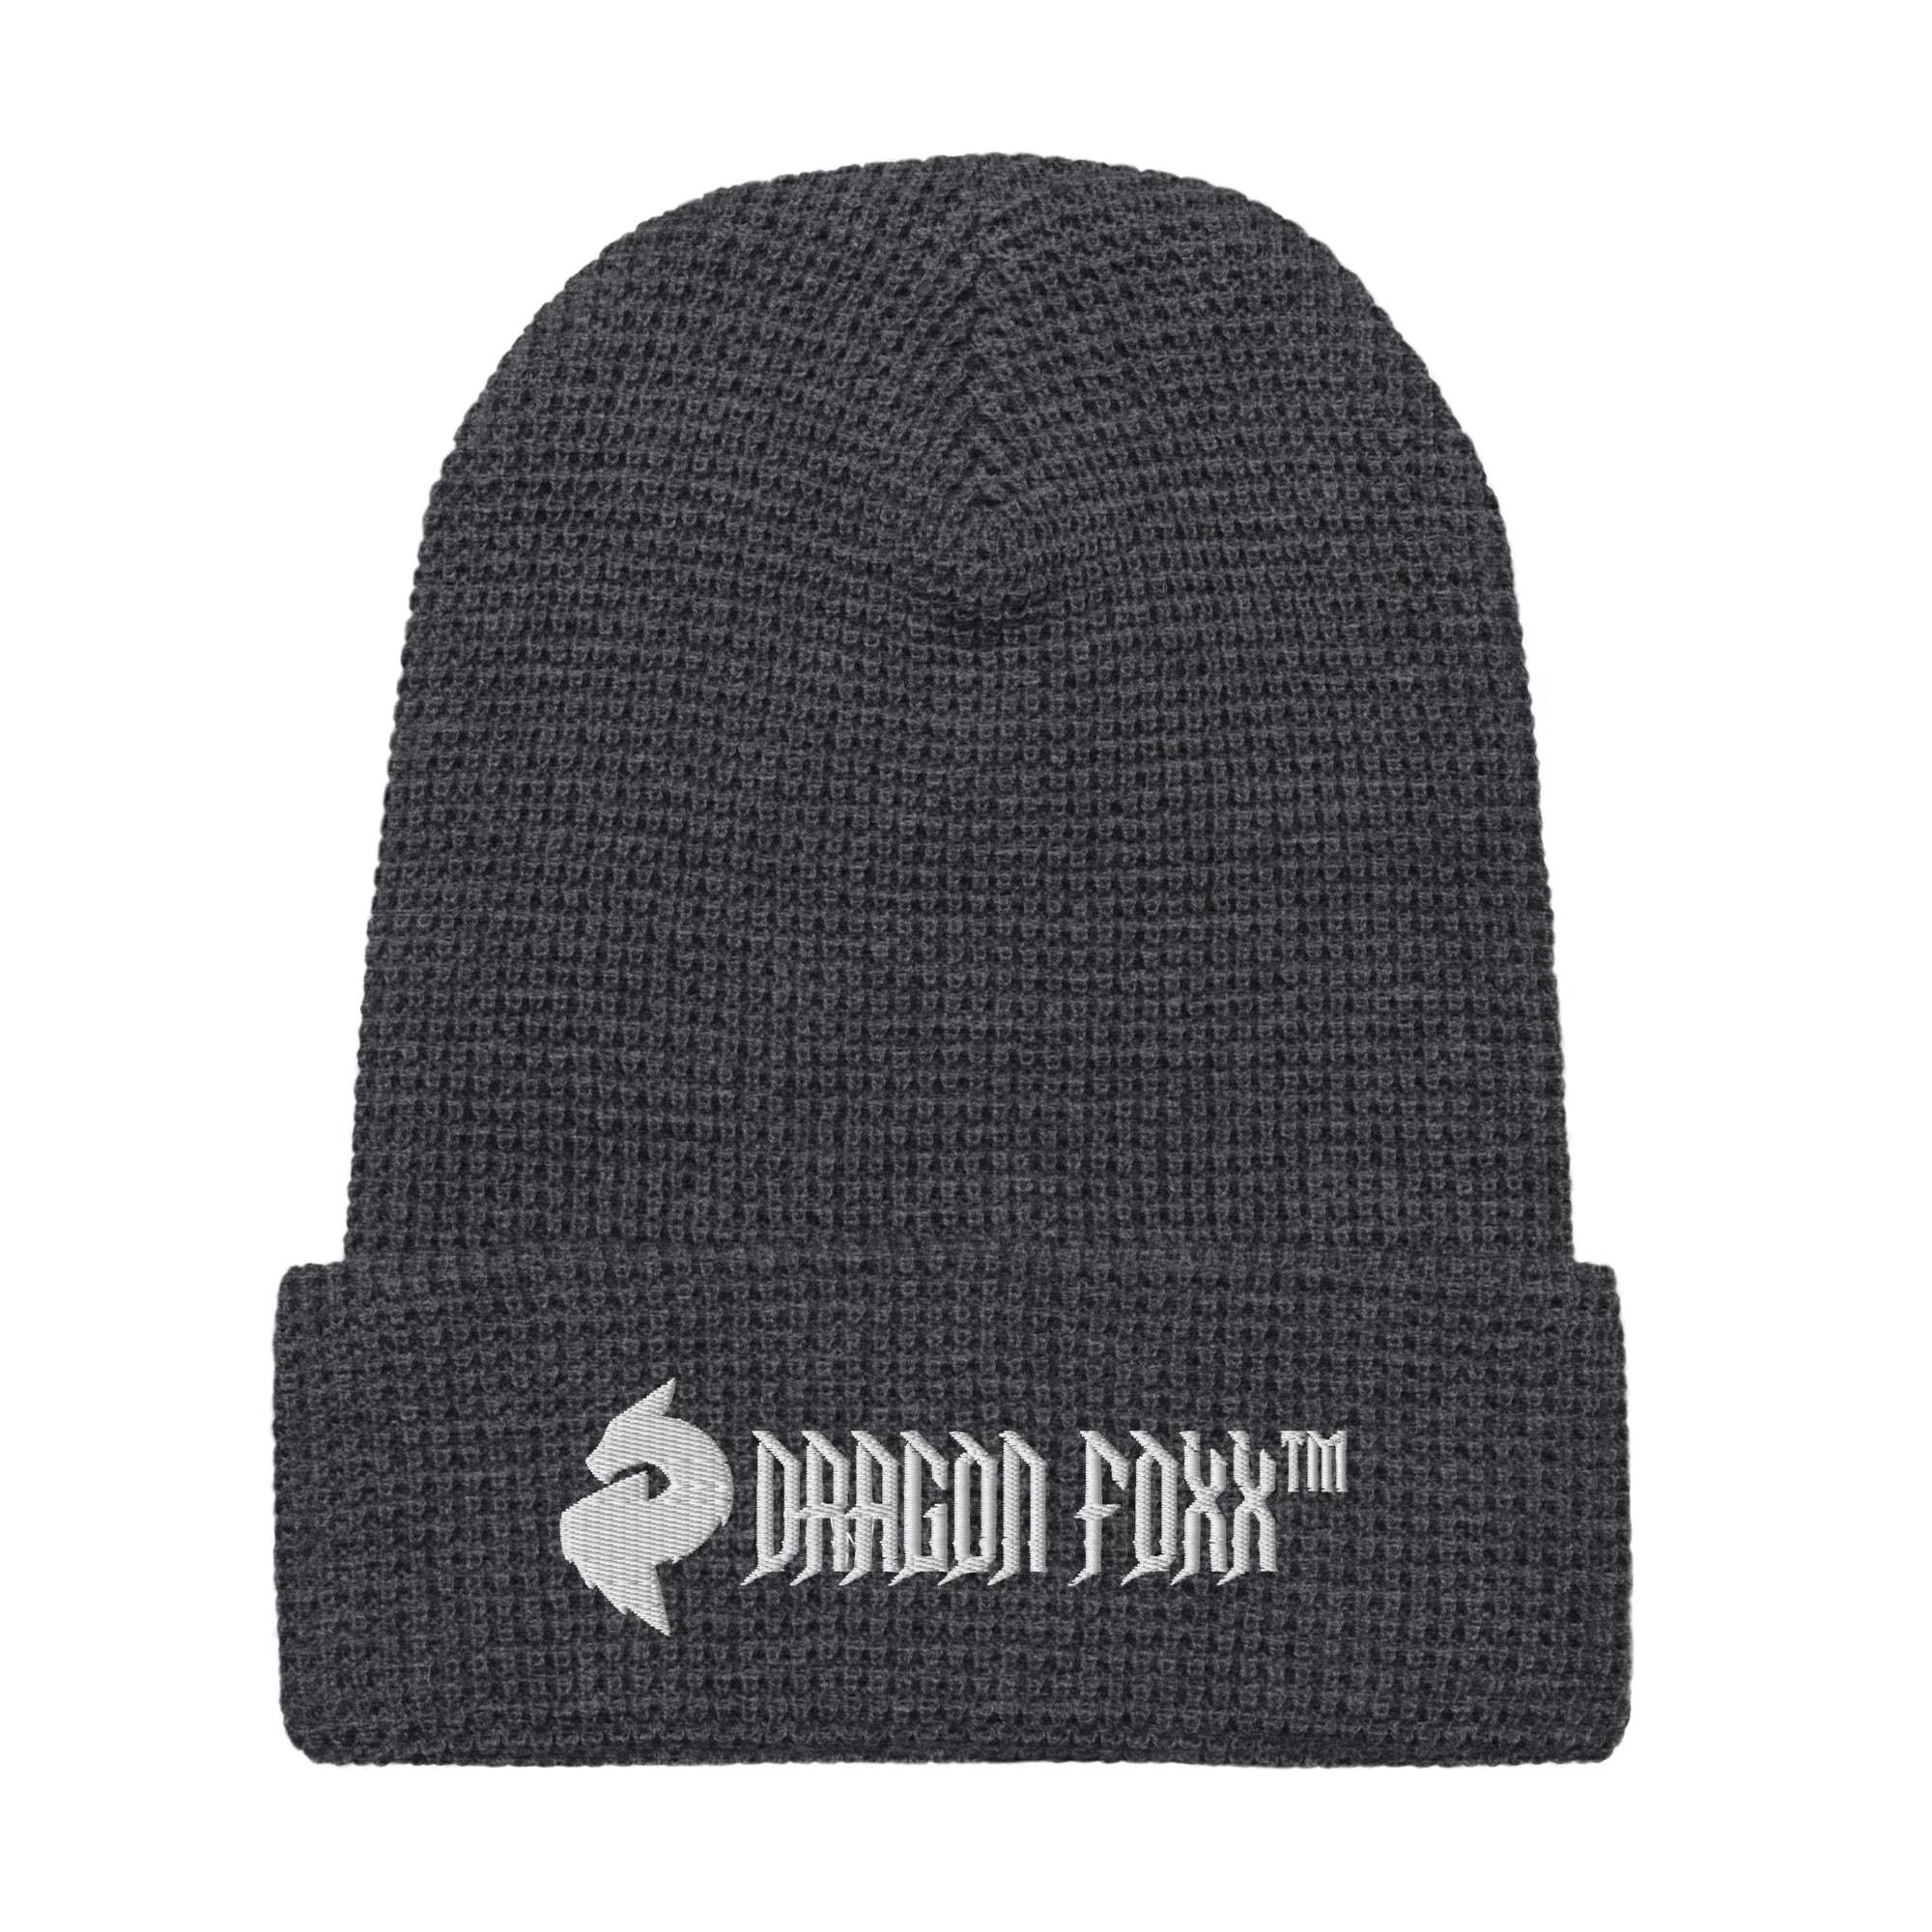 His or Hers Dragon Foxx™ Waffle beanie in 7 Colors - His or Hers Dragon Foxx™ Waffle beanie - DRAGON FOXX™ - His or Hers Dragon Foxx™ Waffle beanie in 7 Colors - 3986040_16176 - Heather Charcoal - - Accessories - Beanie - Beanies